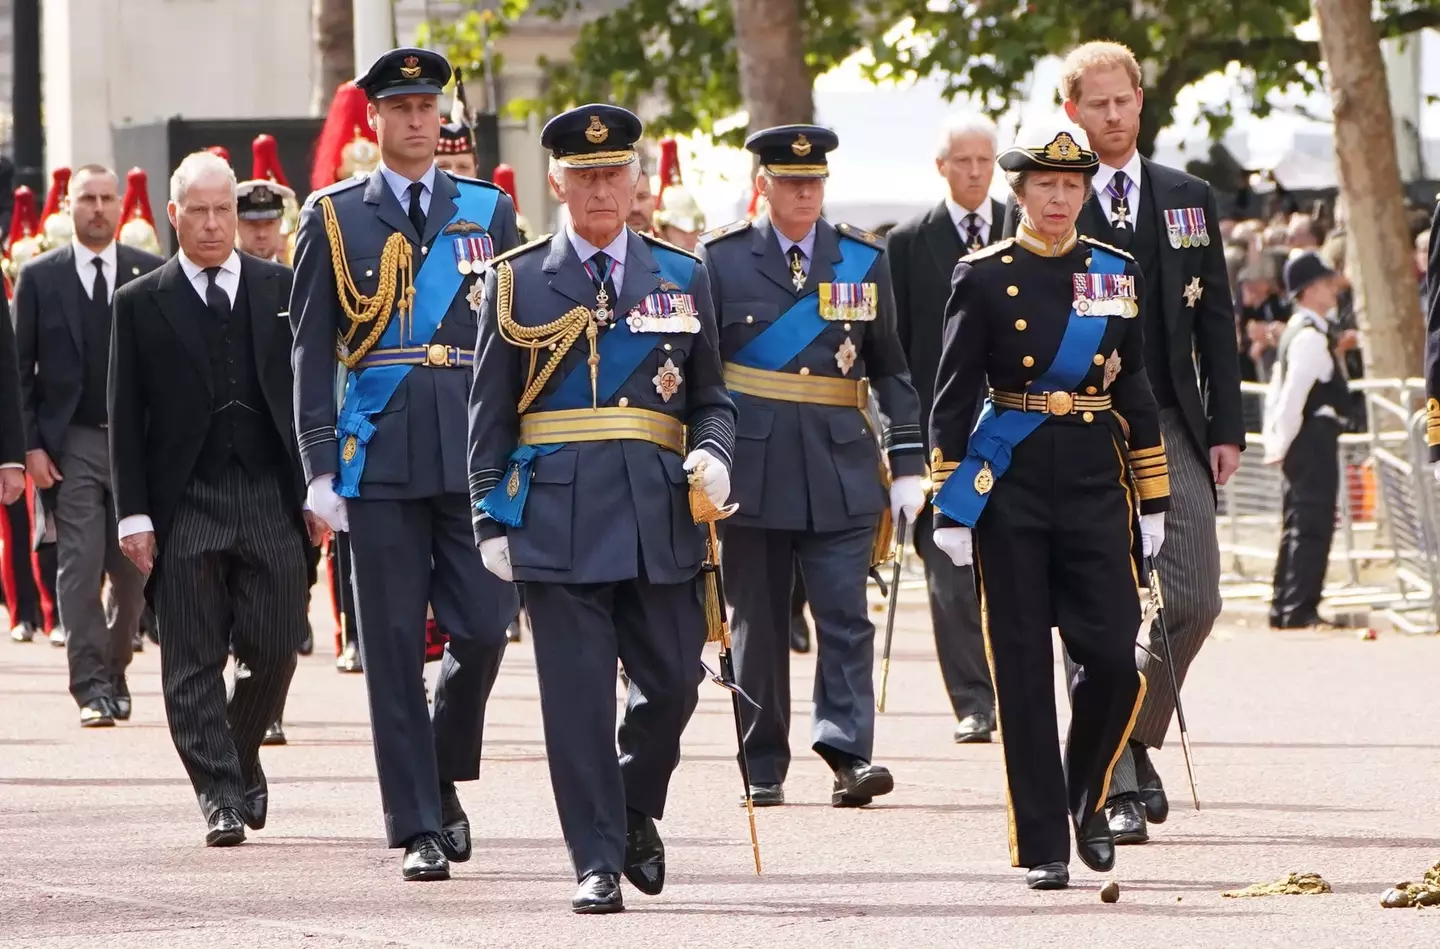 Members of the royal family walked behind the Queen's coffin in the procession.